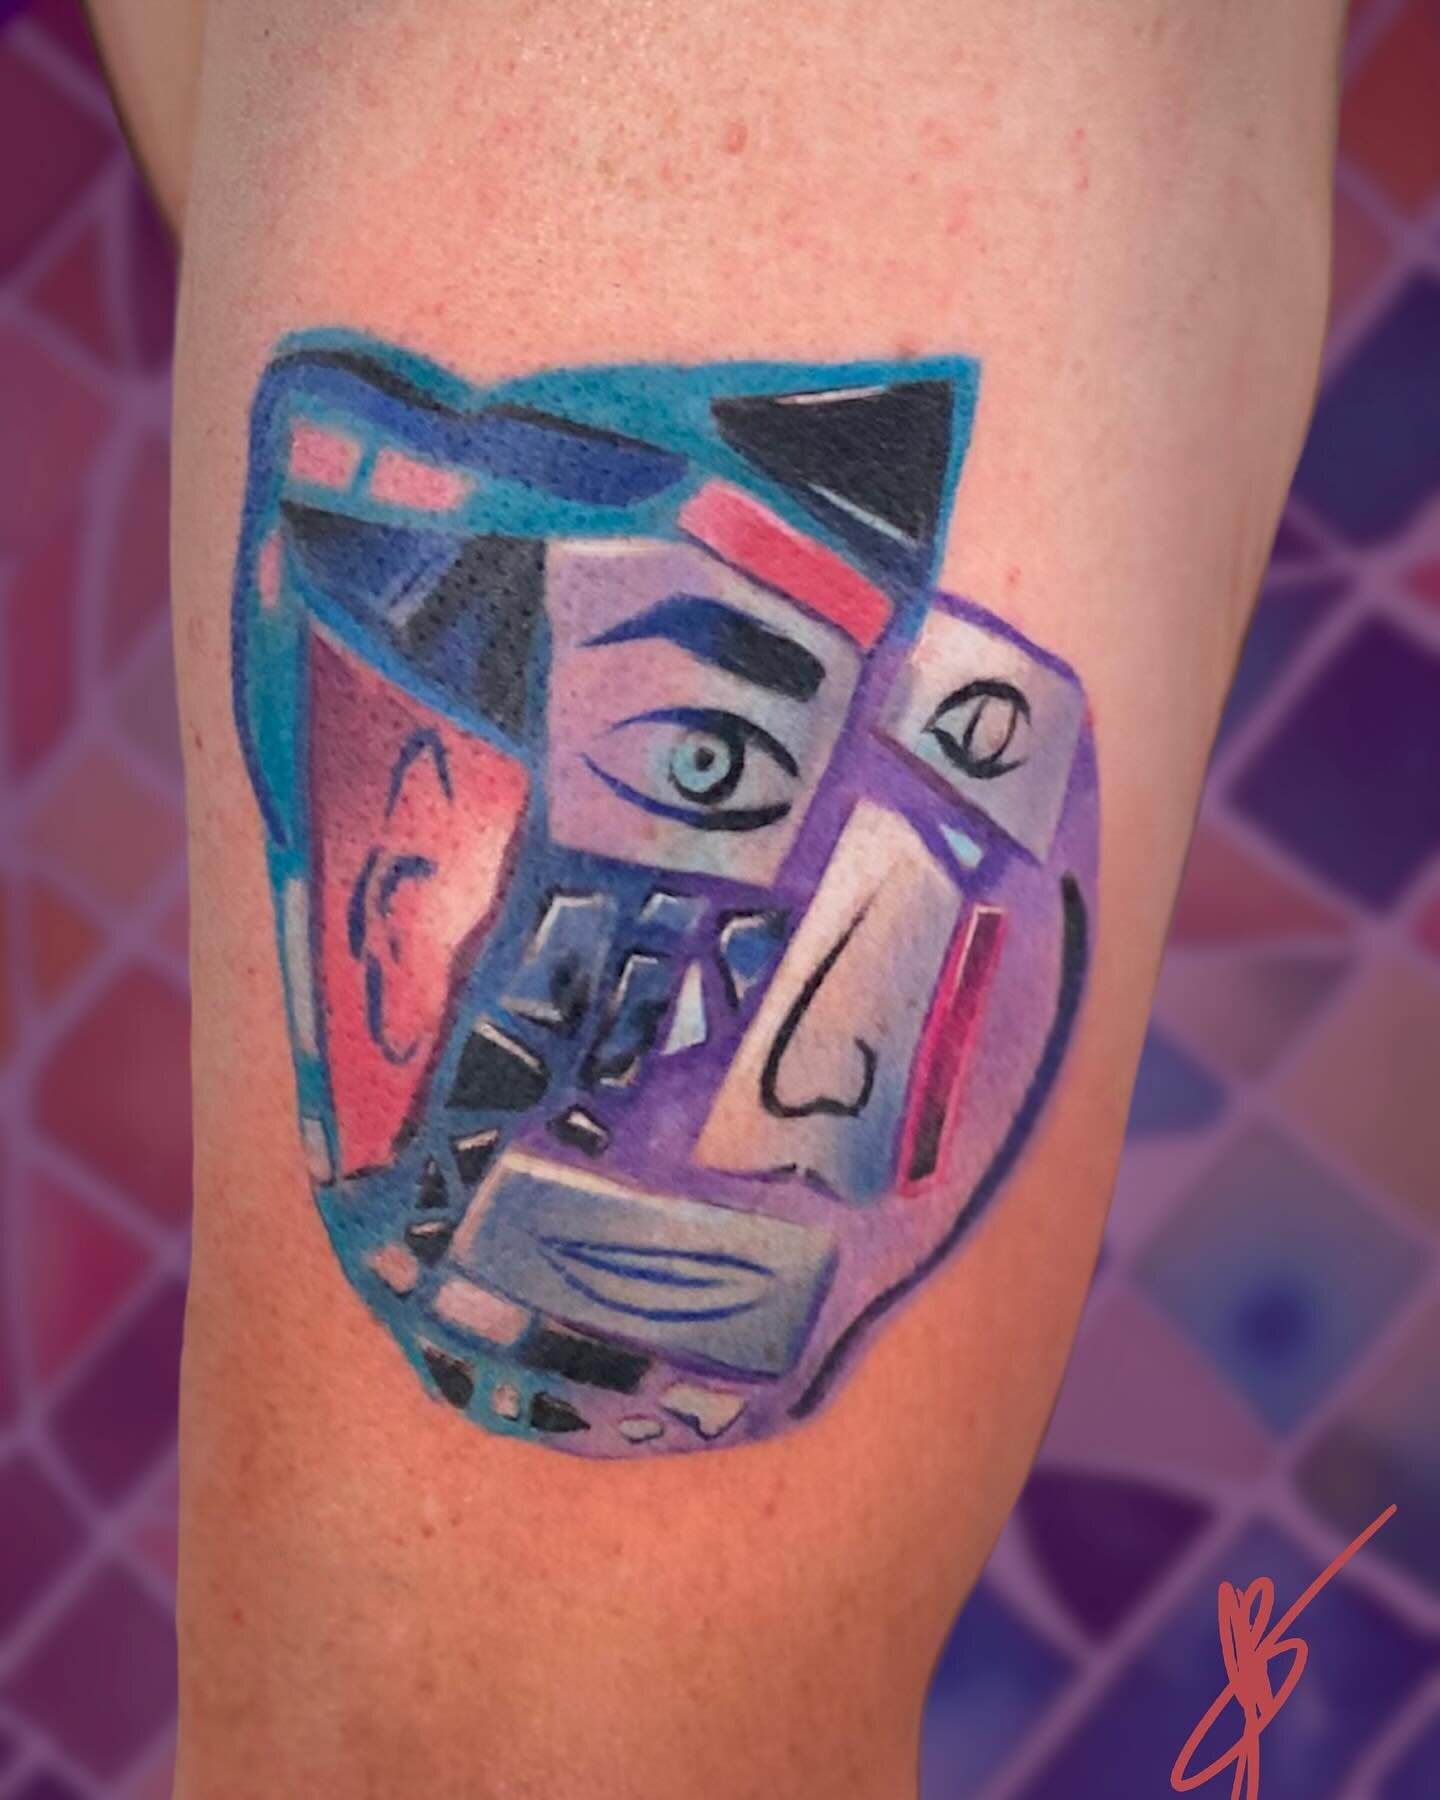 When my client asked me to do a portrait in the style of Philadelphia tile artist, Isaiah Zagar, I wondered how to translate a three dimensional art form with, highly textured and shadowed planes into a tattoo. I had to study Zagar's work to see what